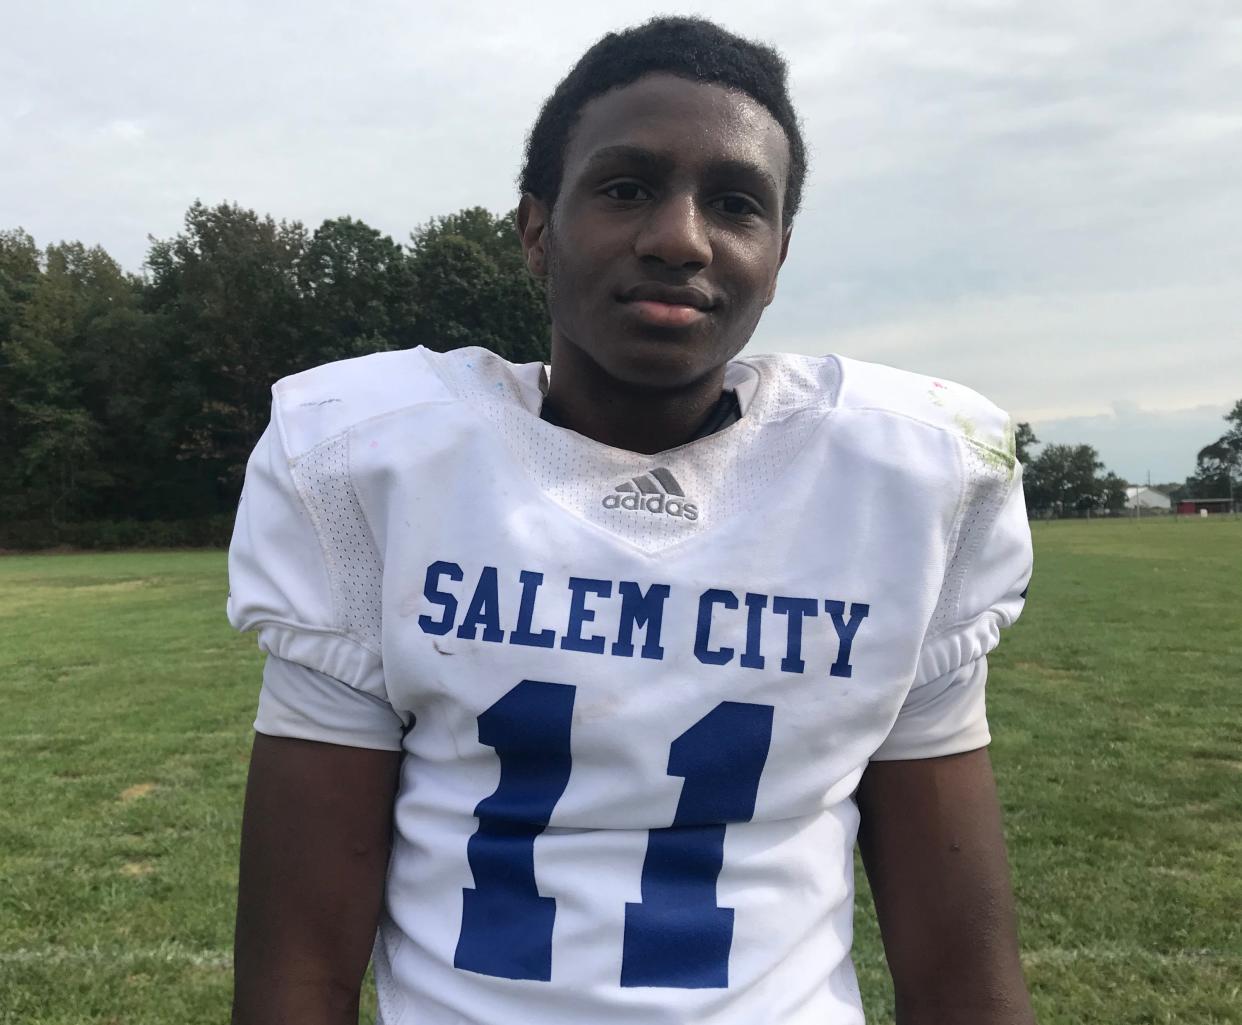 Salem's Amare Smith had a forced fumble and recovered one that he took for a touchdown during a 35-14 victory over Penns Grove on Saturday.